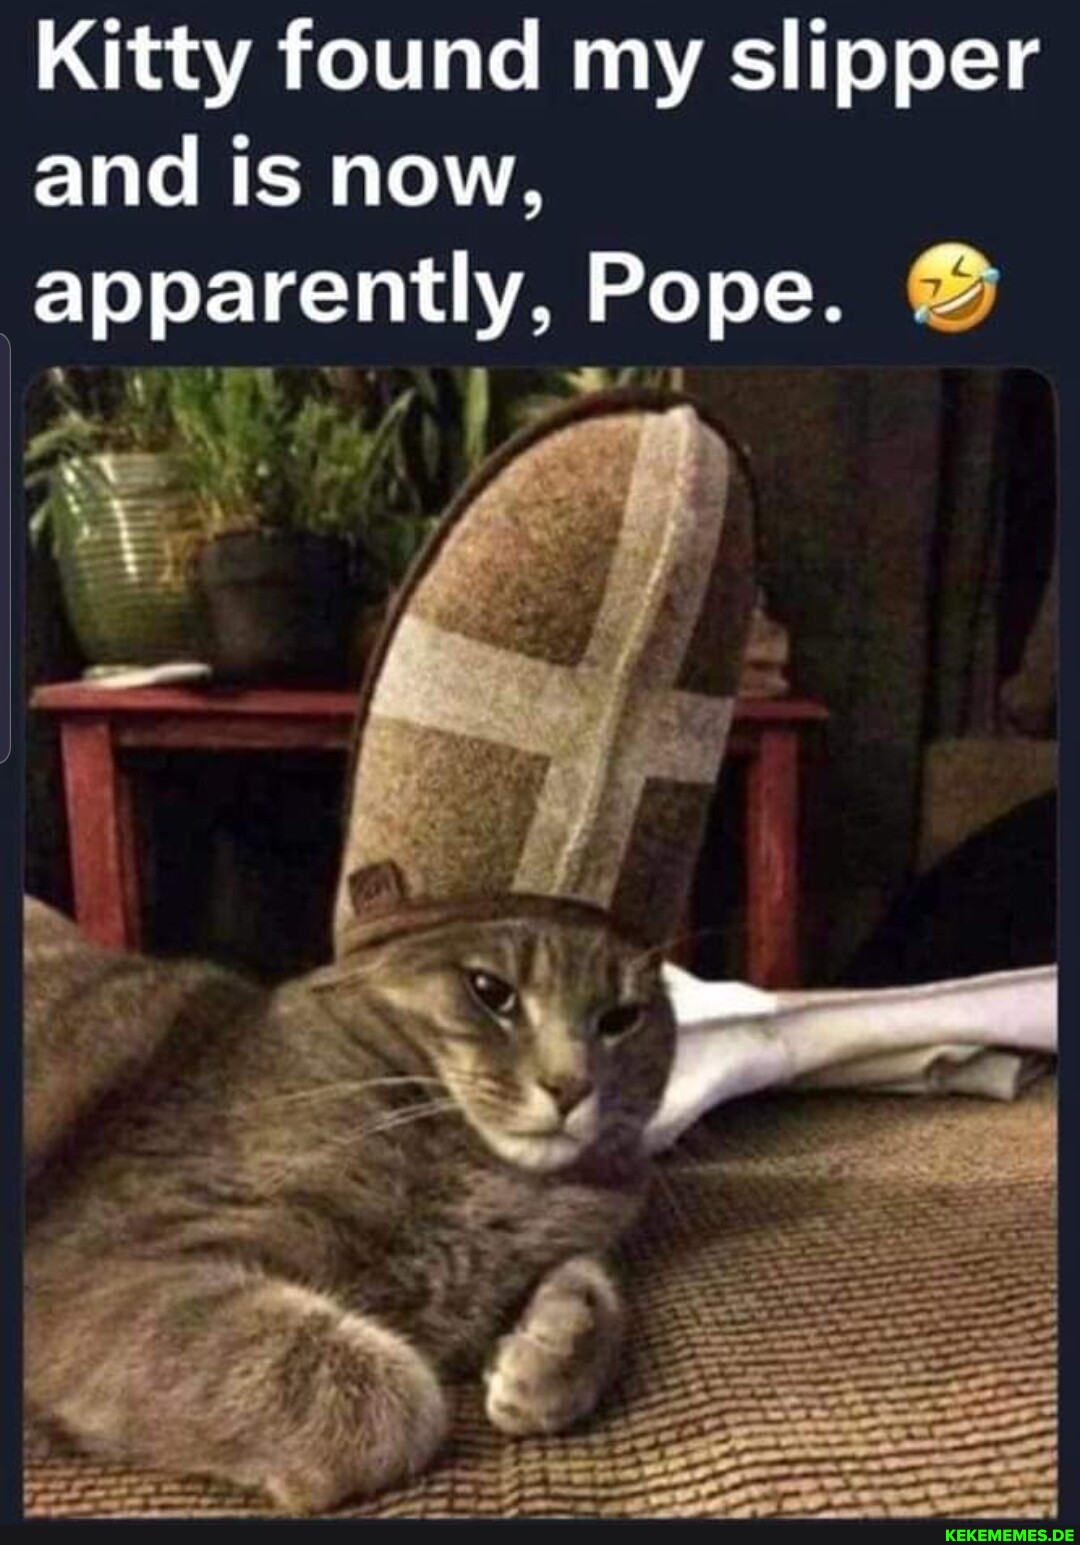 Kitty found my slipper and is now, apparently, Pope.